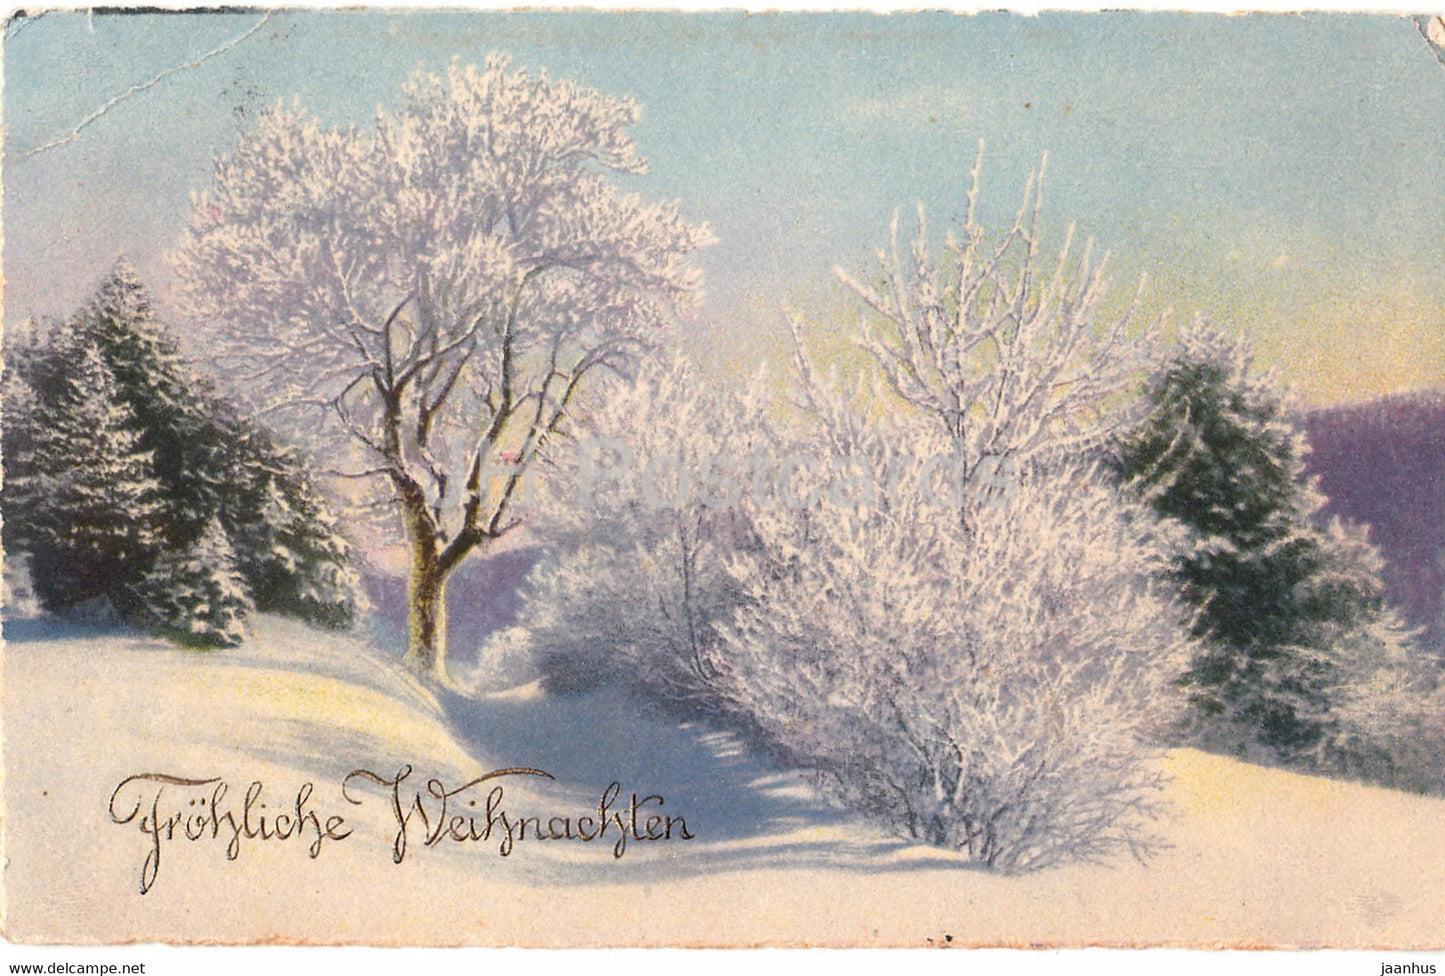 Christmas Greeting Card - Frohliche Weihnachten - winter view HB Photochromie 4513  old postcard - 1929 - Germany - used - JH Postcards